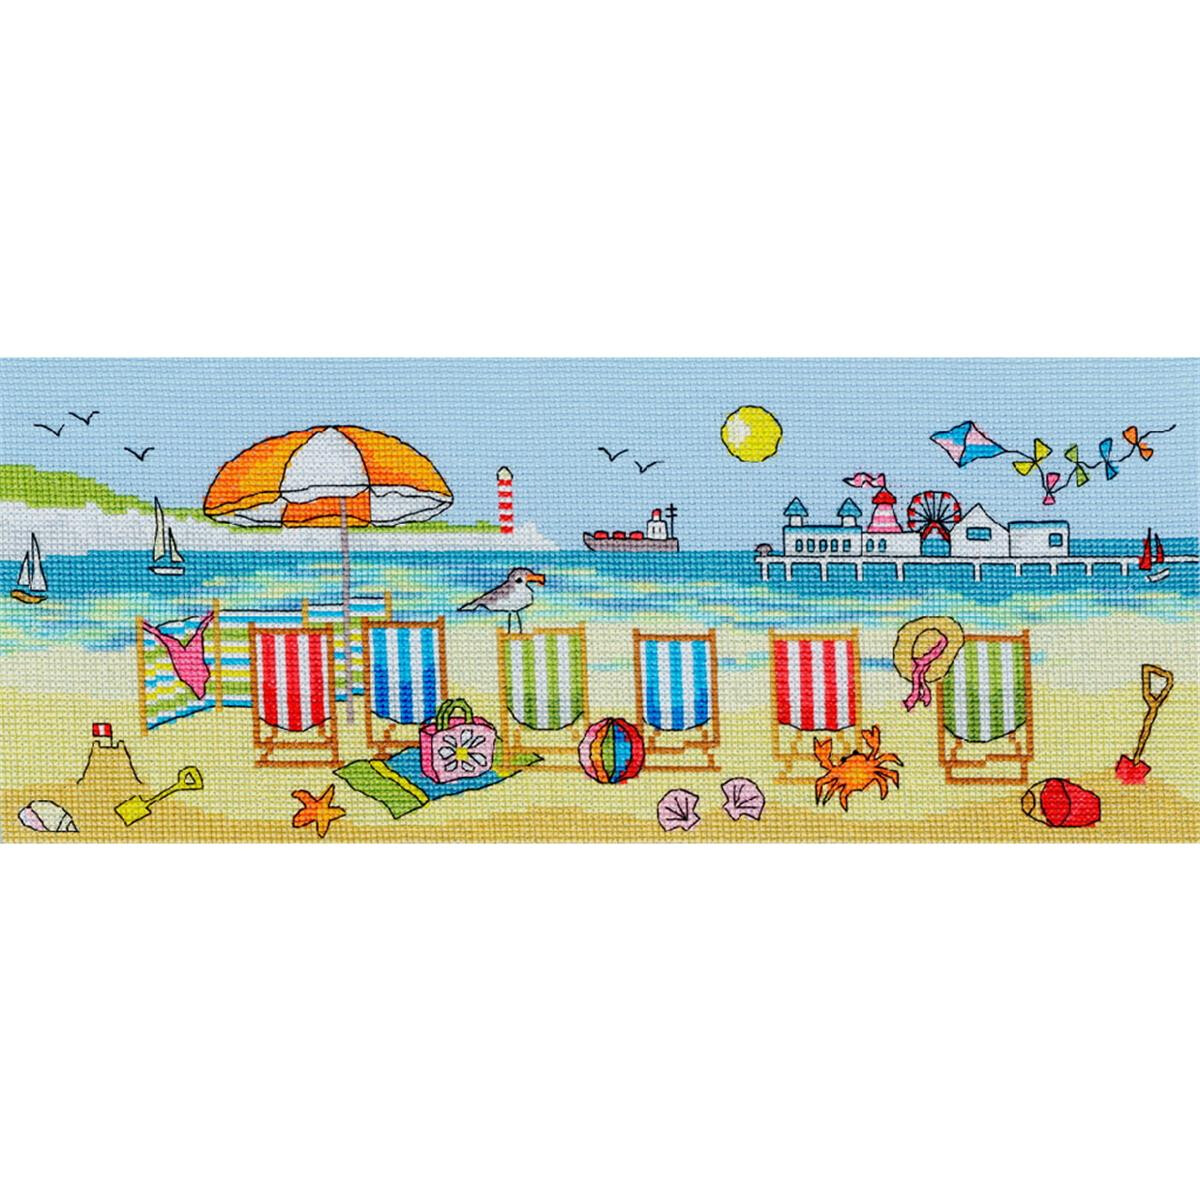 A lively coastal scene with colorful deck chairs lined up...